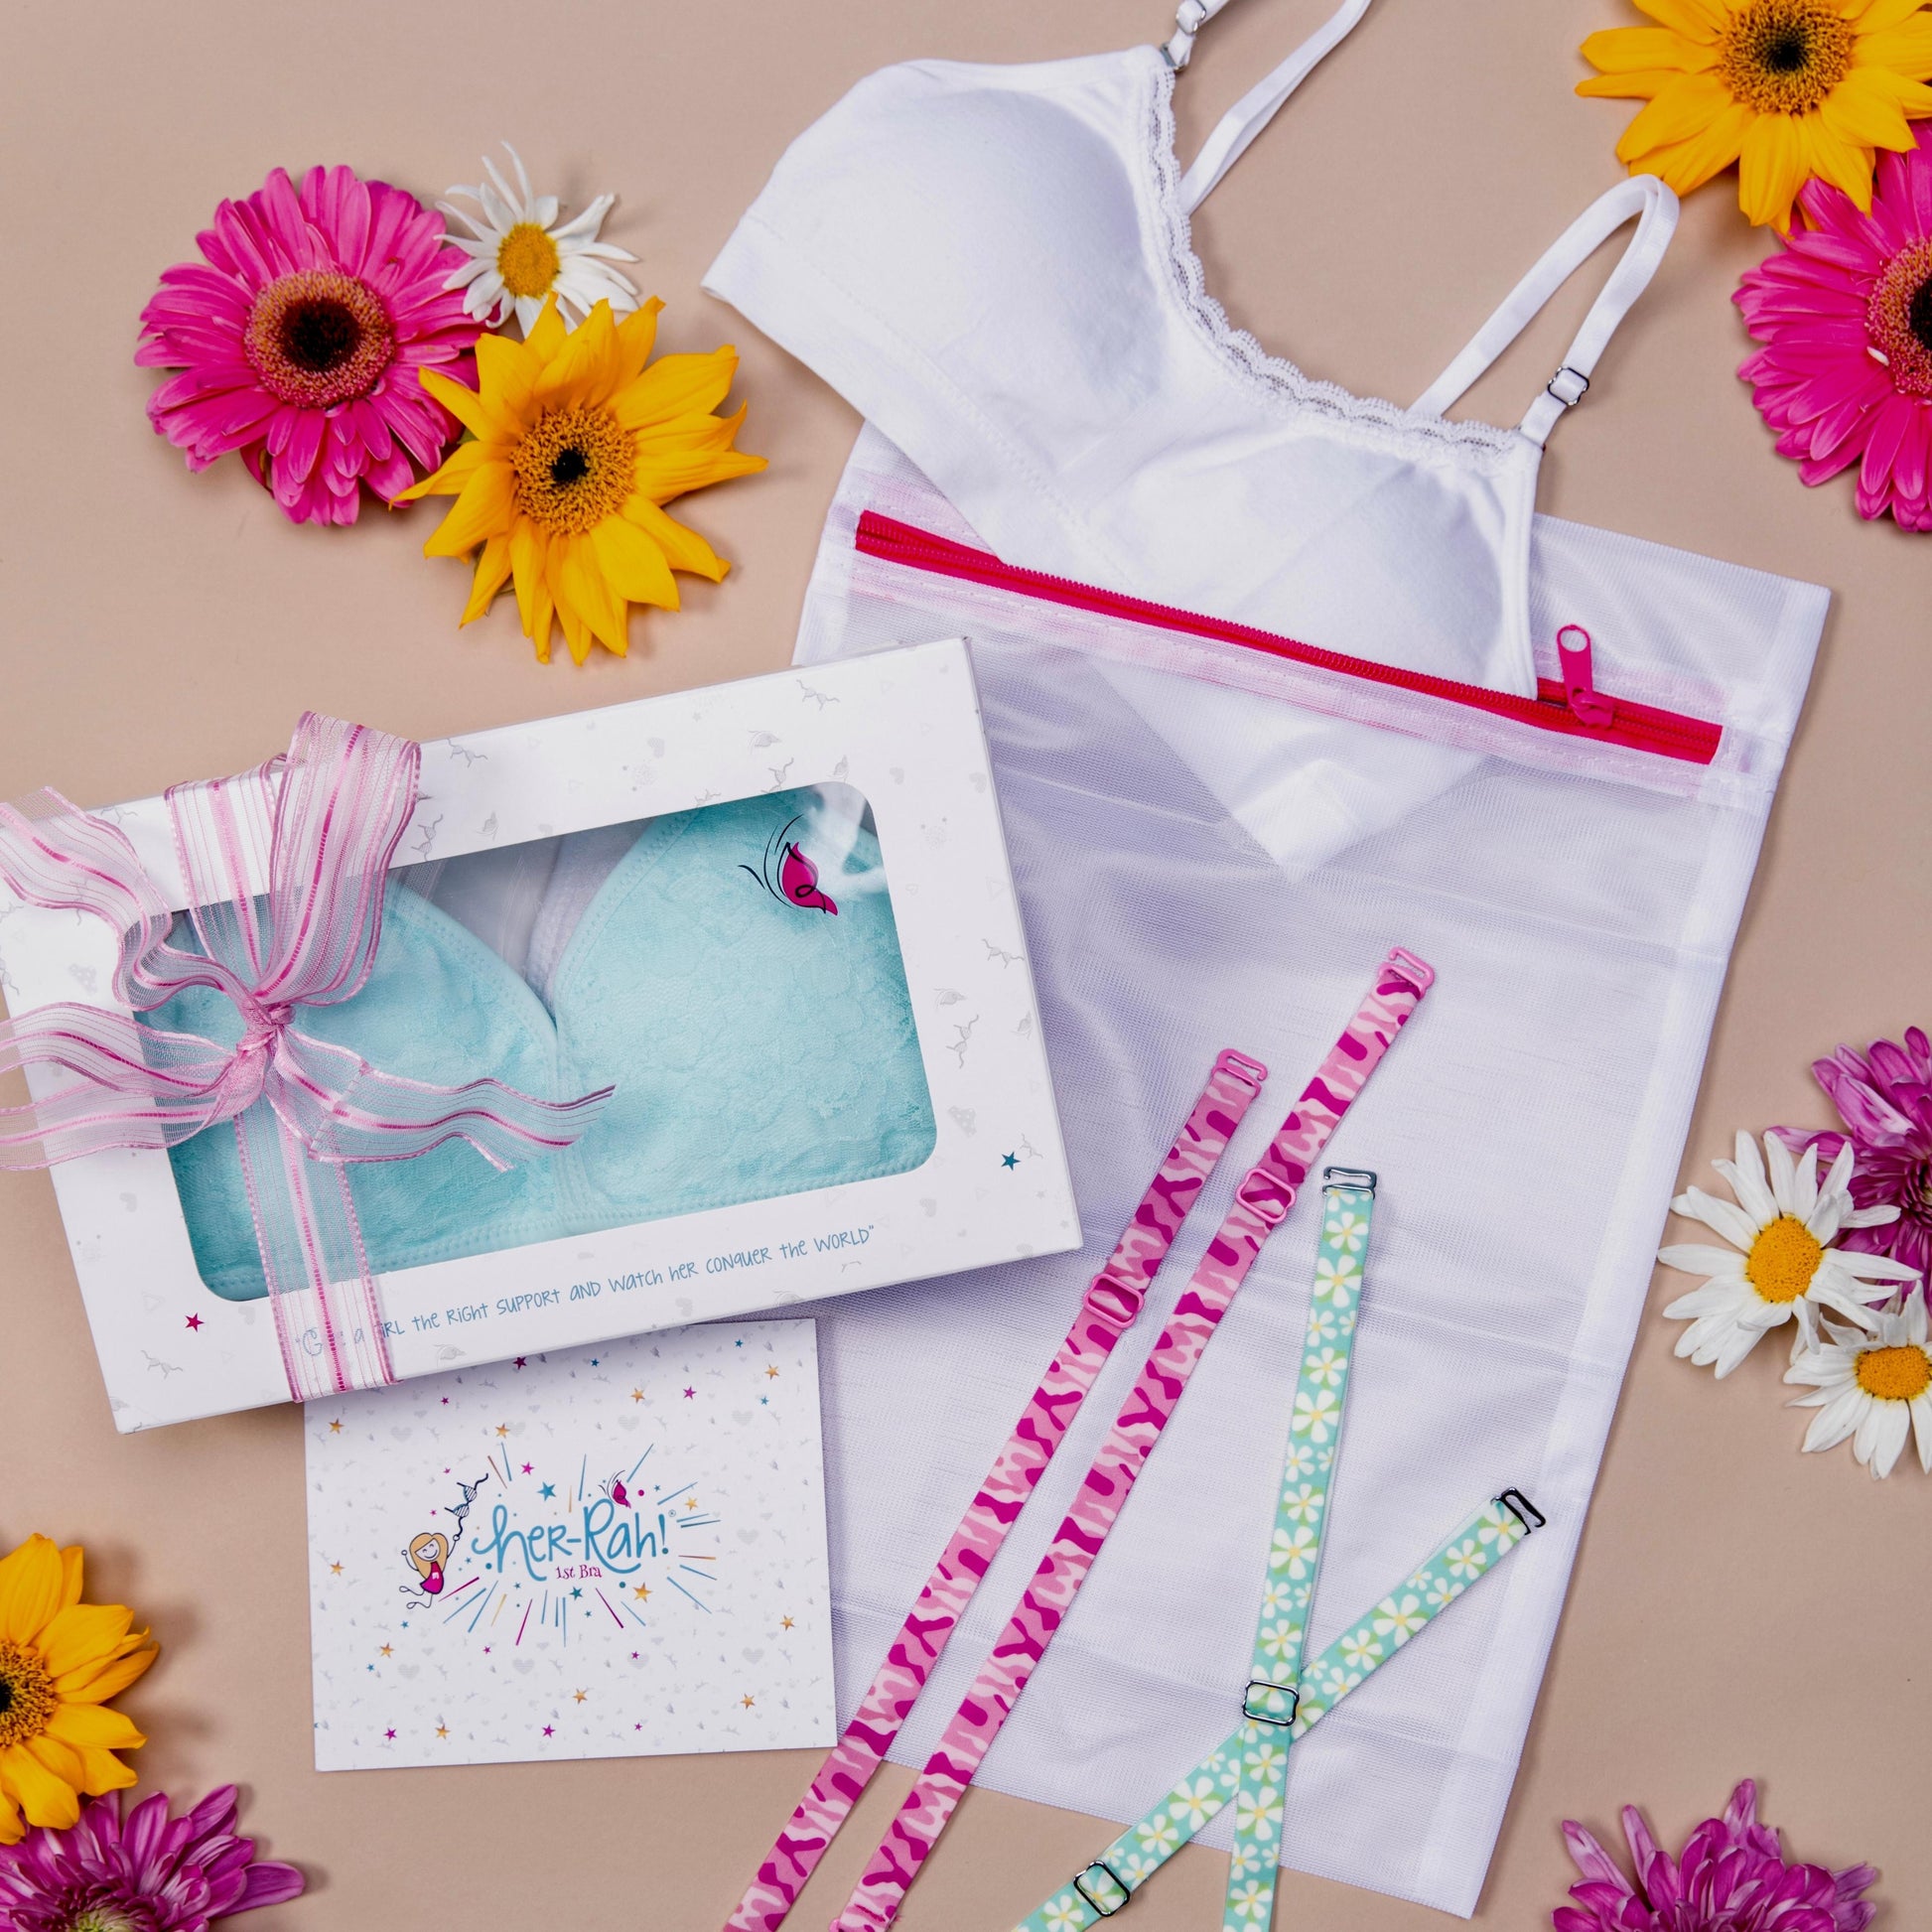 Lily Deluxe Bundle – Her Rah 1st Bra